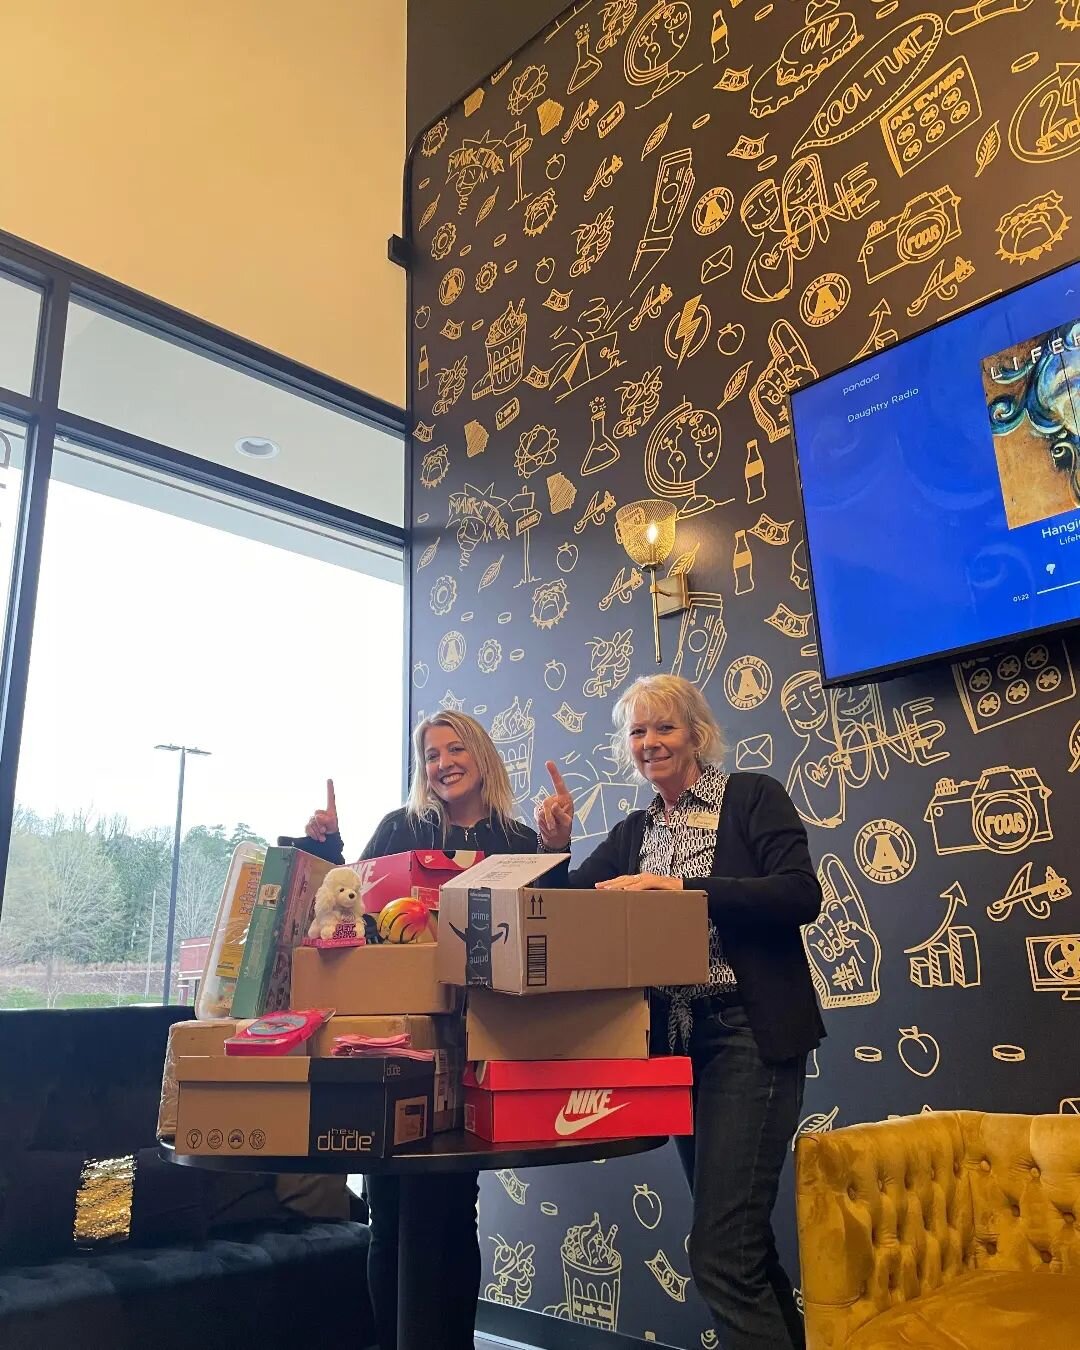 We want to thank everyone who donated cheer boxes for the children of Ukraine this week! We received so many and can't wait to ship them out from both our Duluth and Woodstock locations. 🇺🇦 🇺🇦 
#realtyonegroup #realtyonegroupedge #realtyone